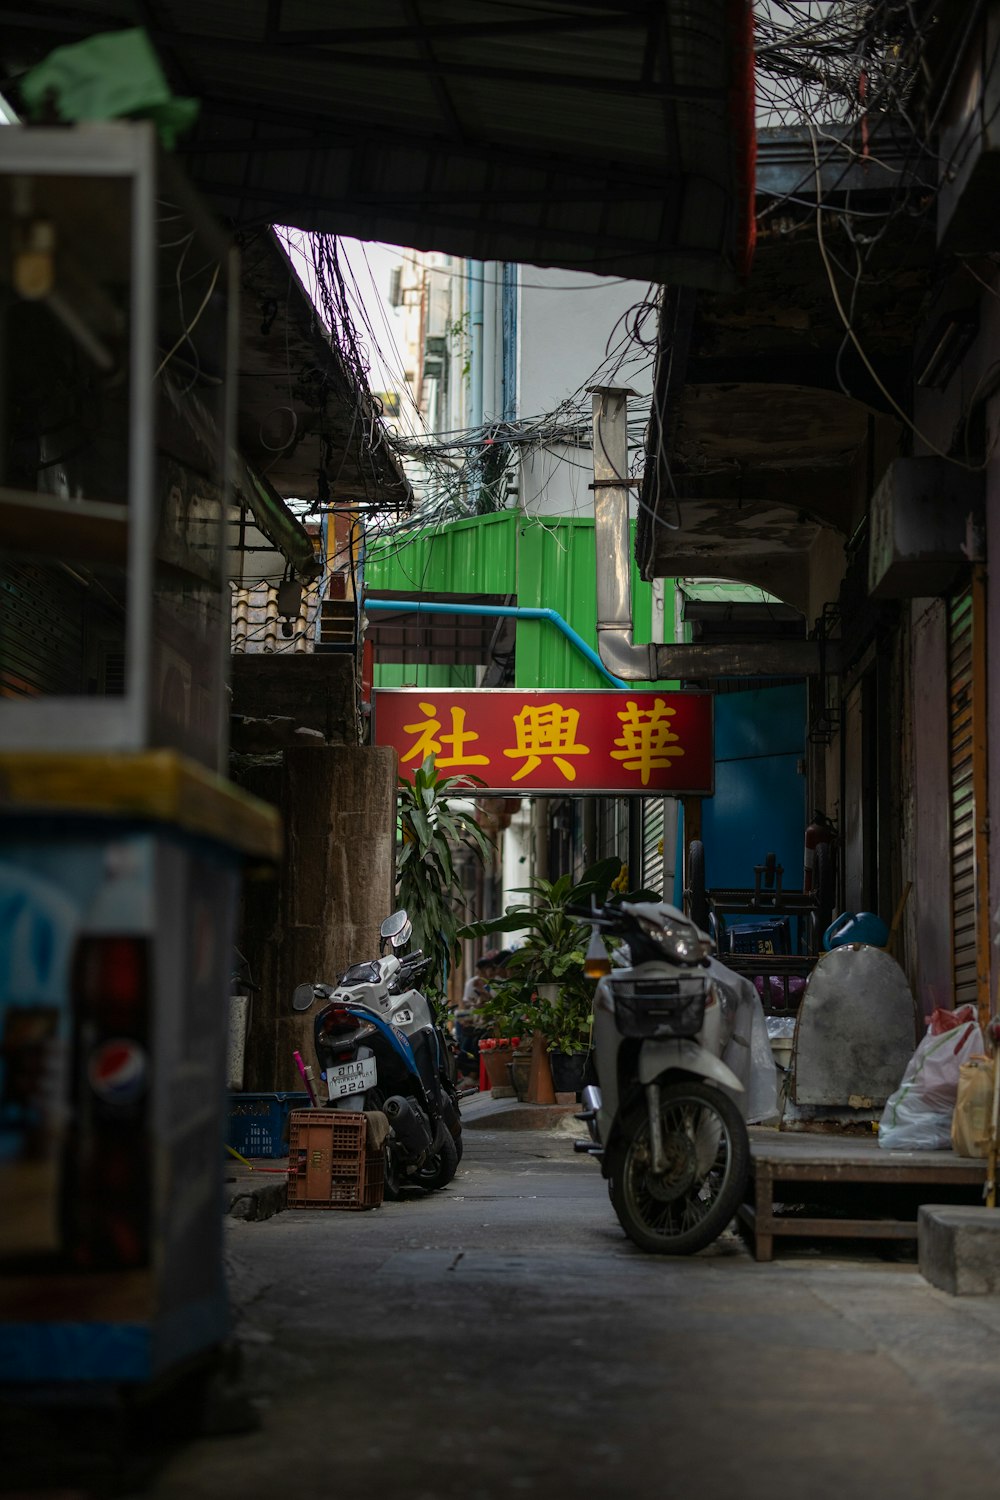 a motorcycle parked in a narrow alley way